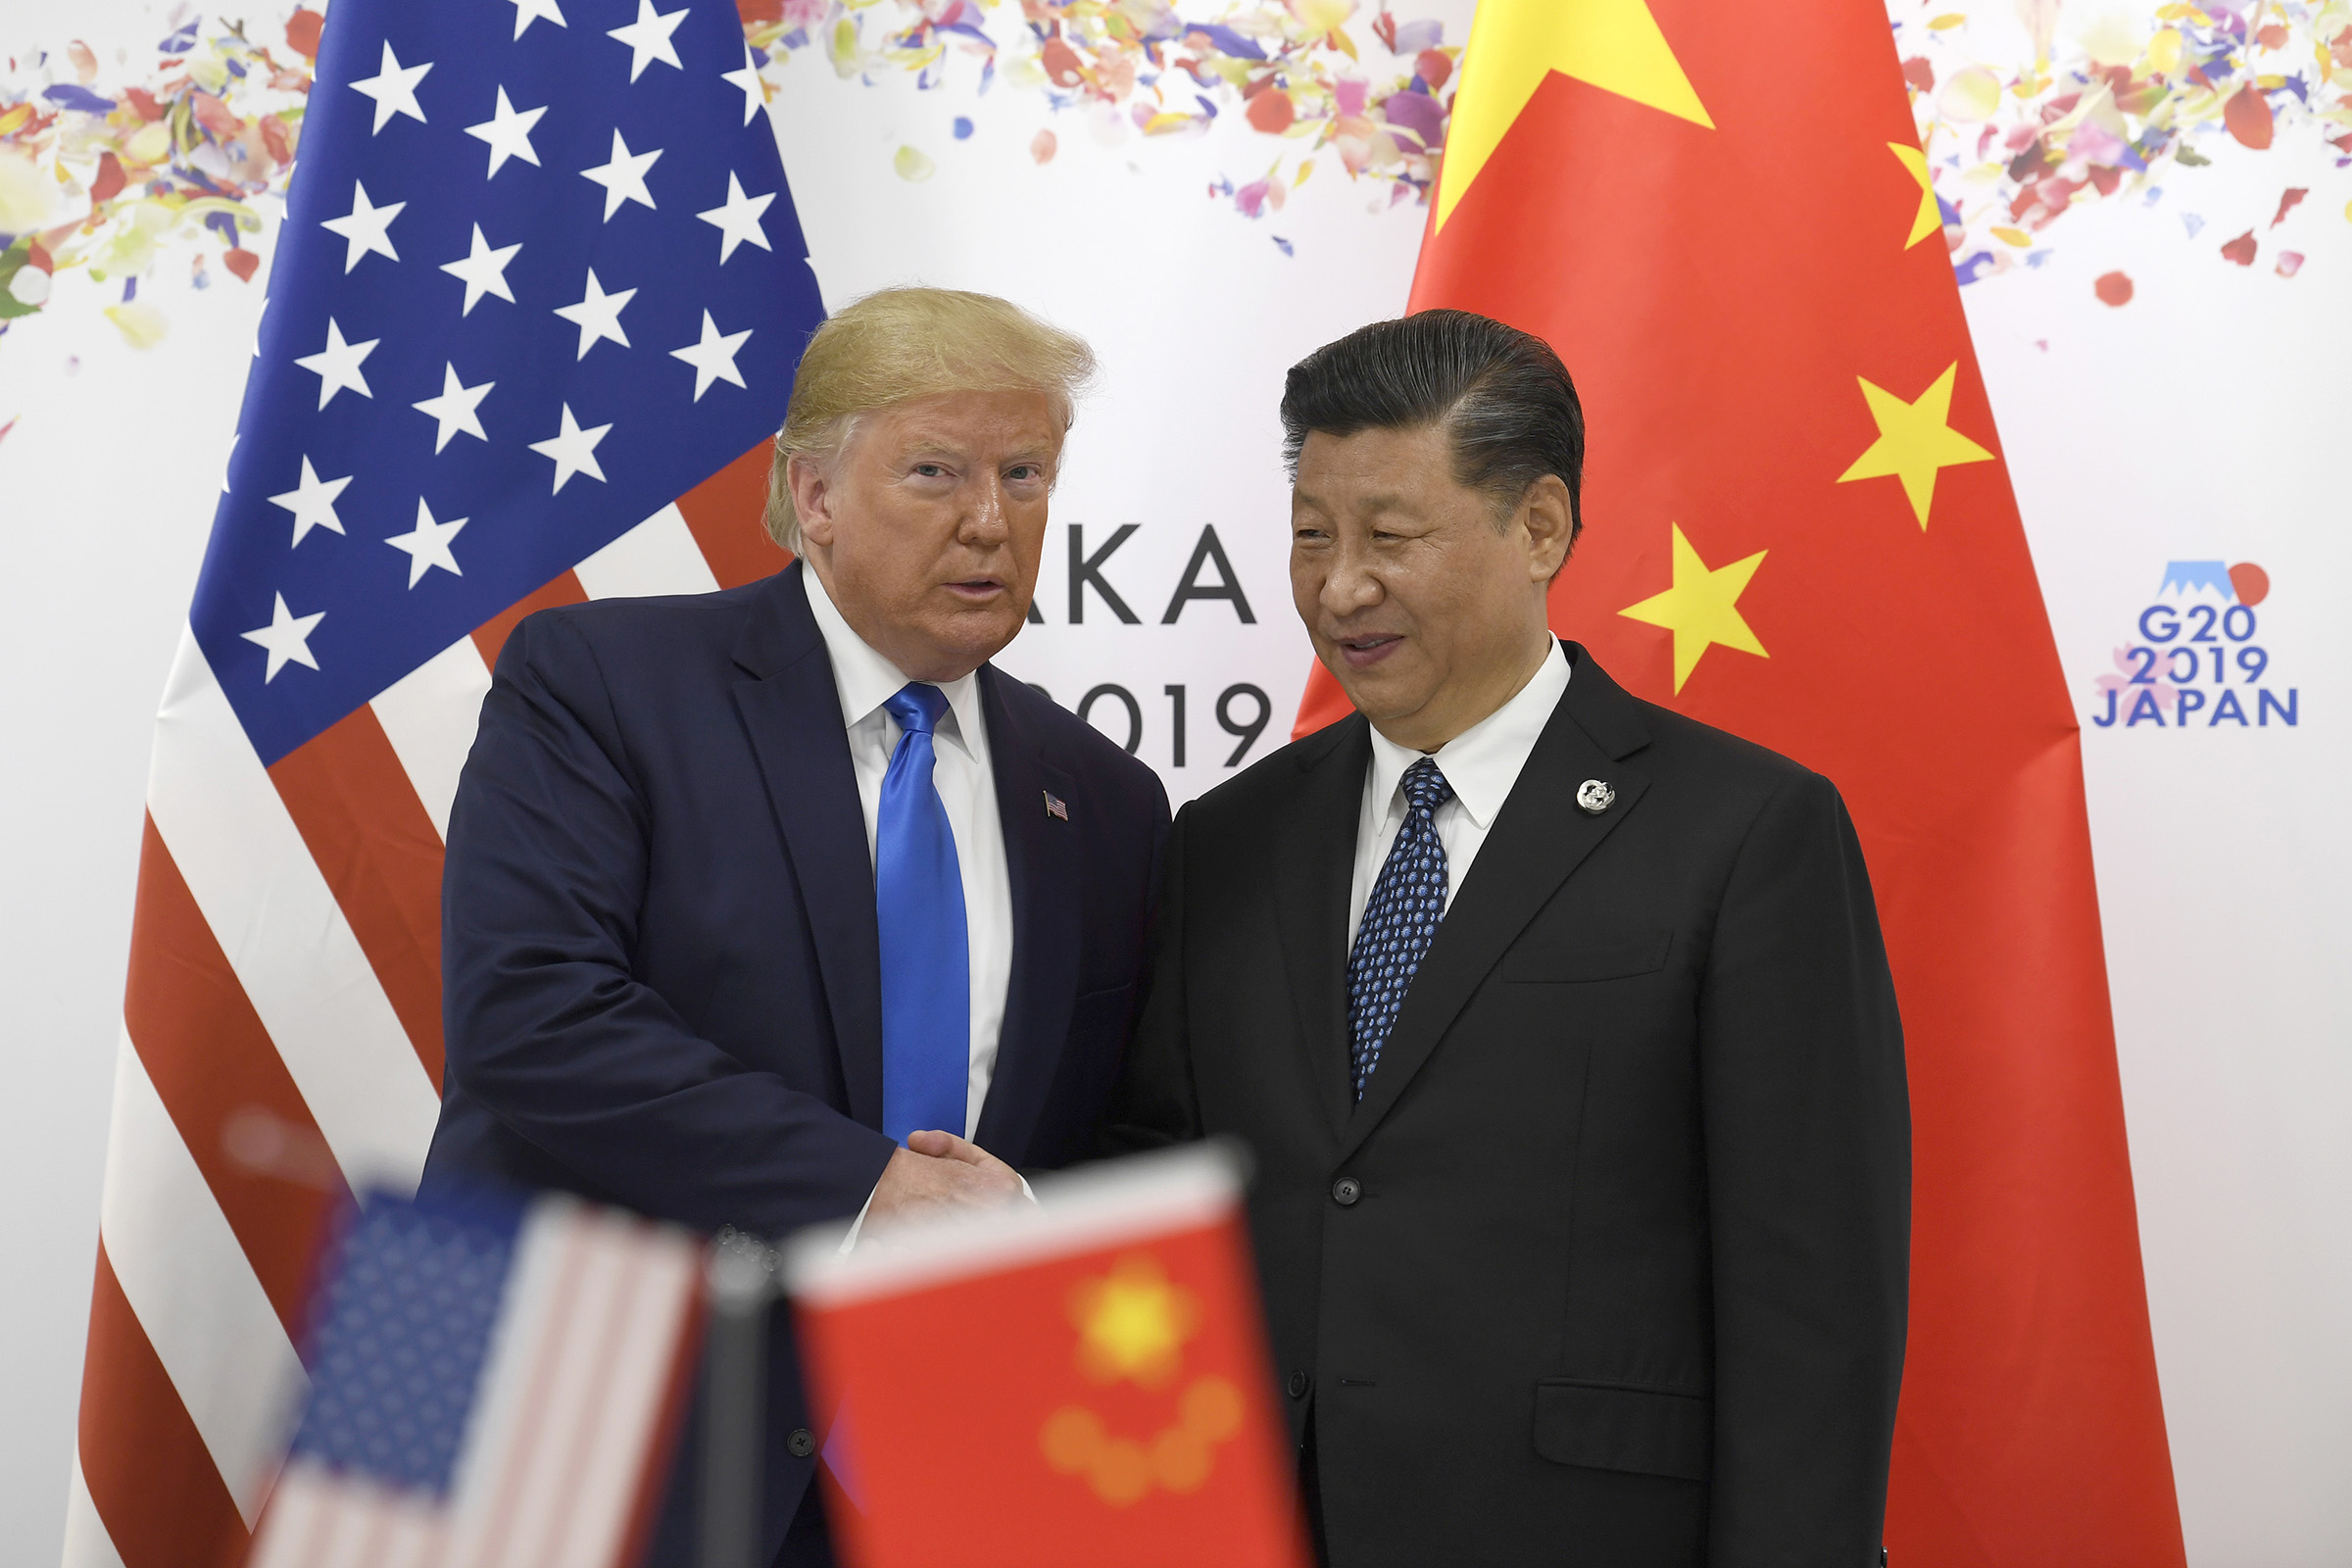 President Donald Trump poses for a photo with Chinese President Xi Jinping during a meeting on the sidelines of the G-20 summit in Osaka, Japan, on June 29, 2019. (Susan Walsh—AP)